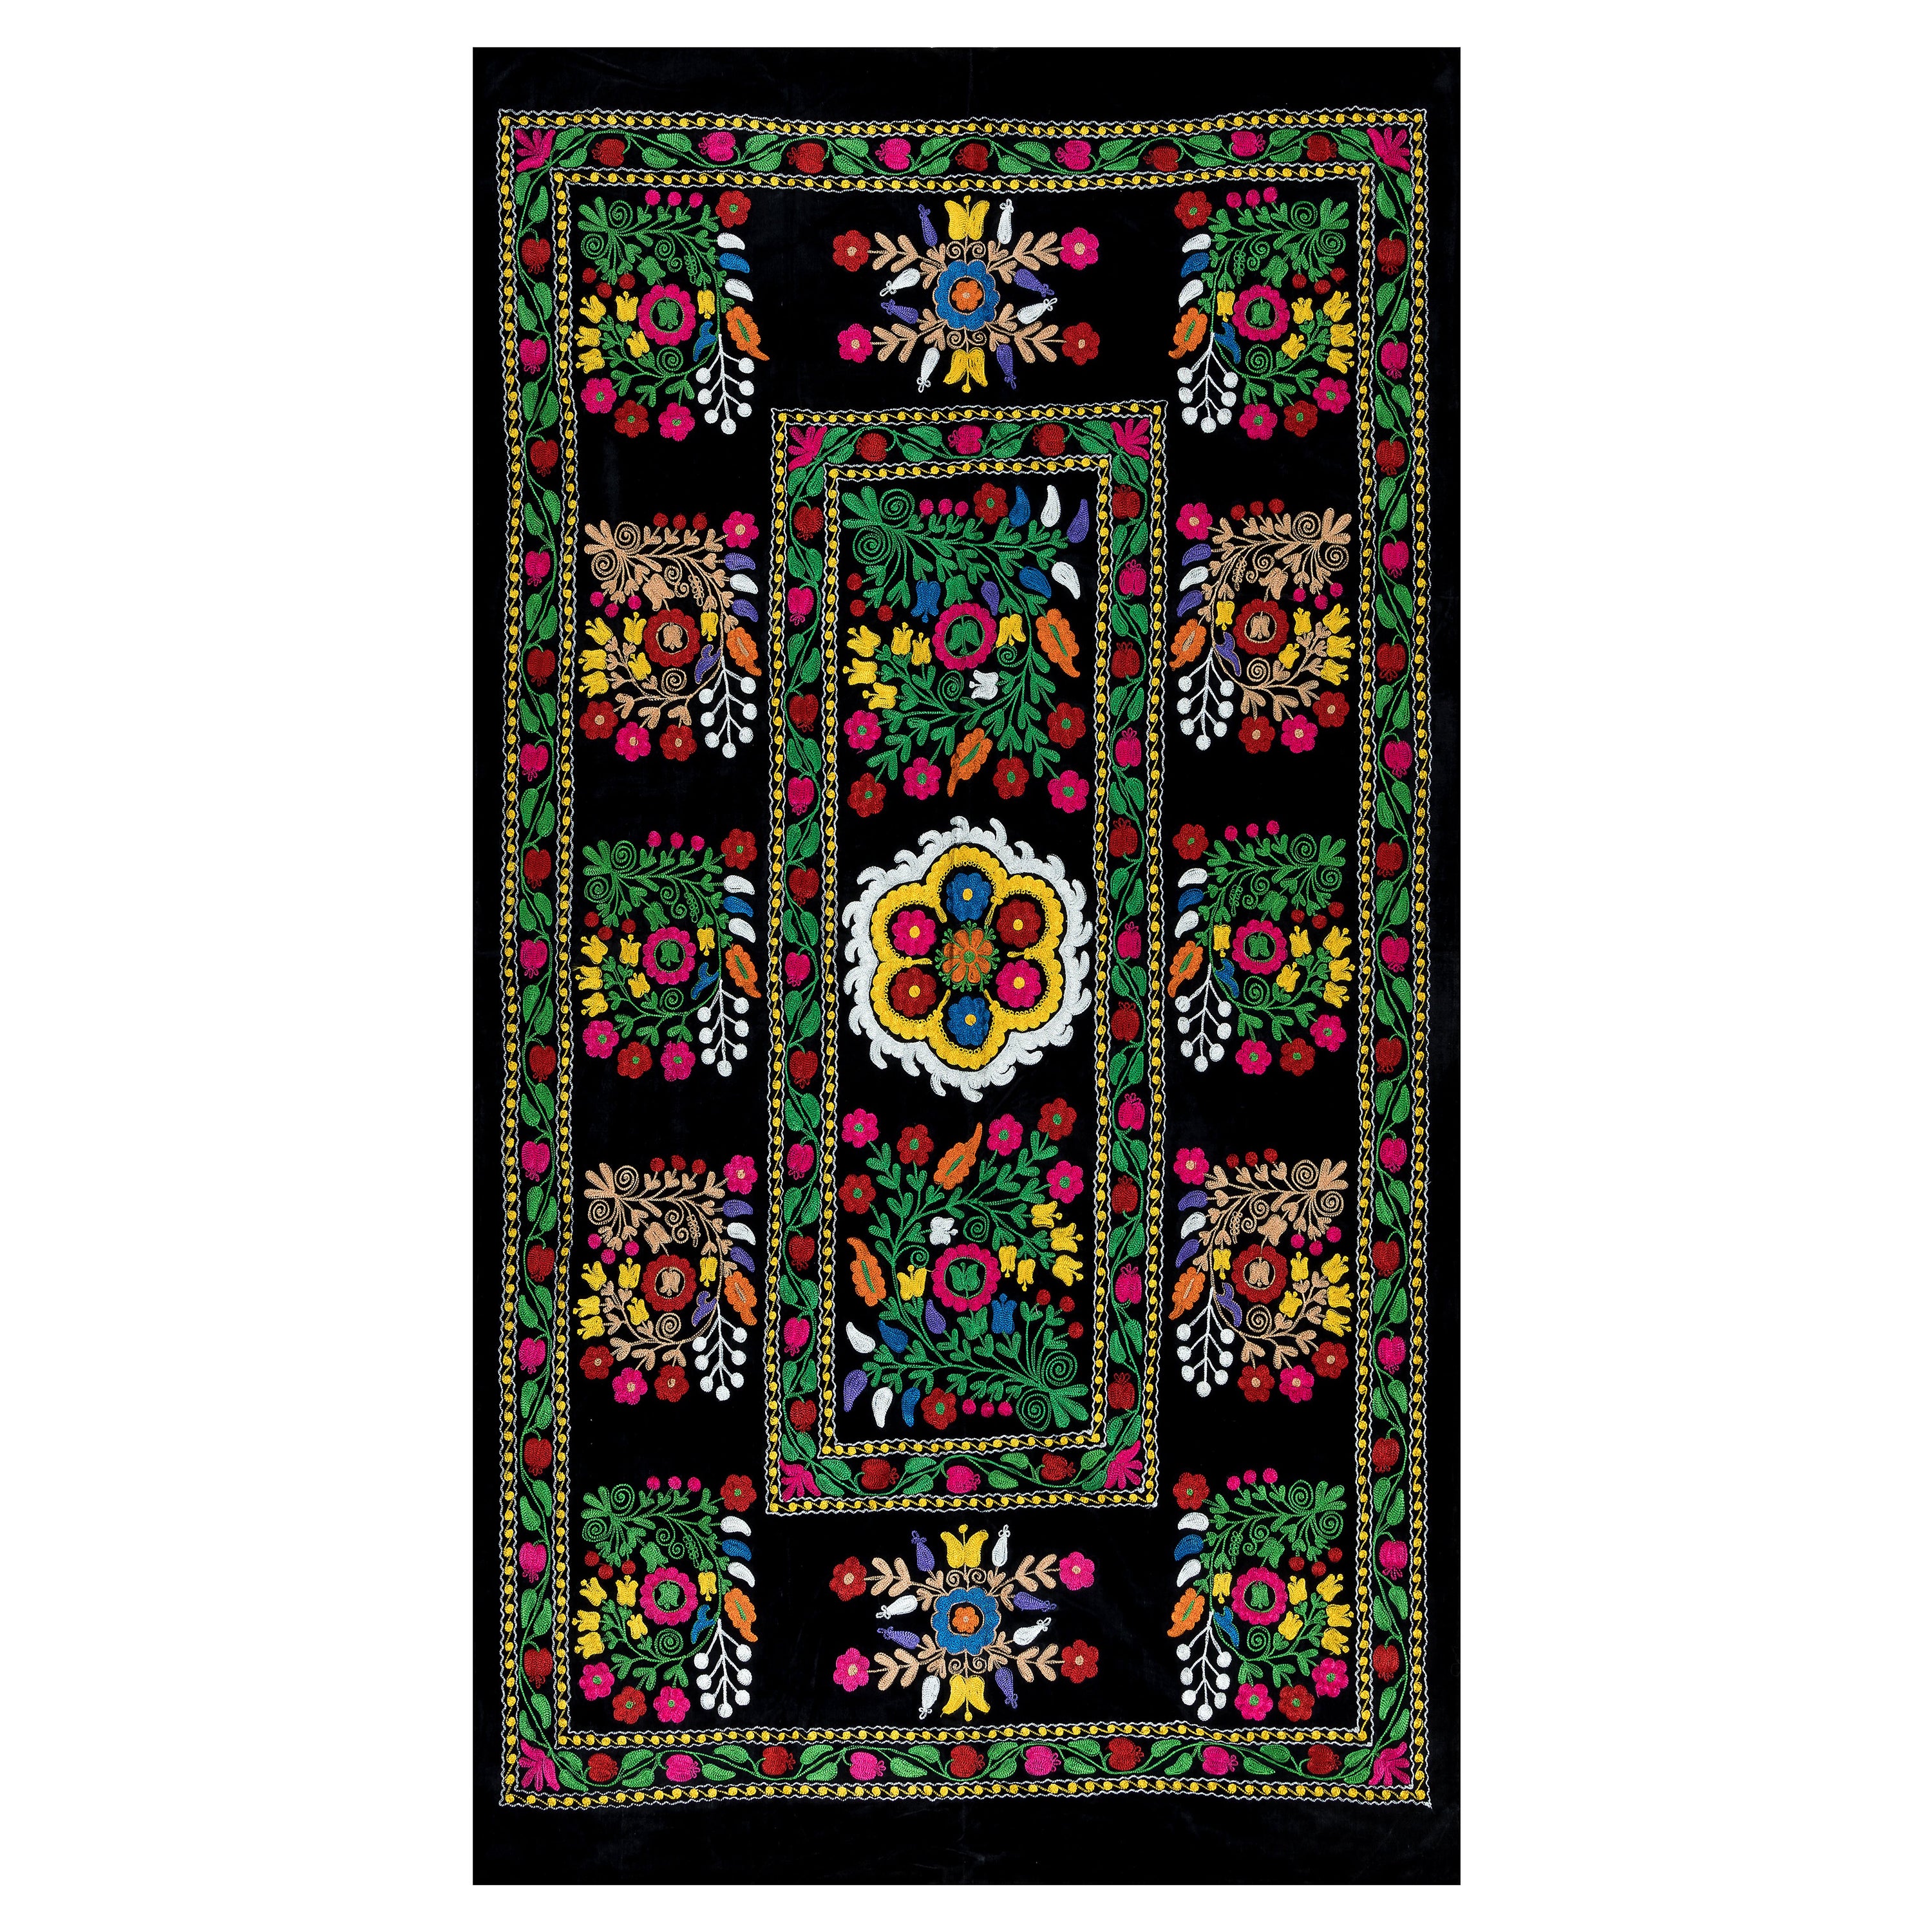 4x7.4 Ft Silk Embroidery Table Cover, Colorful Wall Hanging, Vintage Bedspread